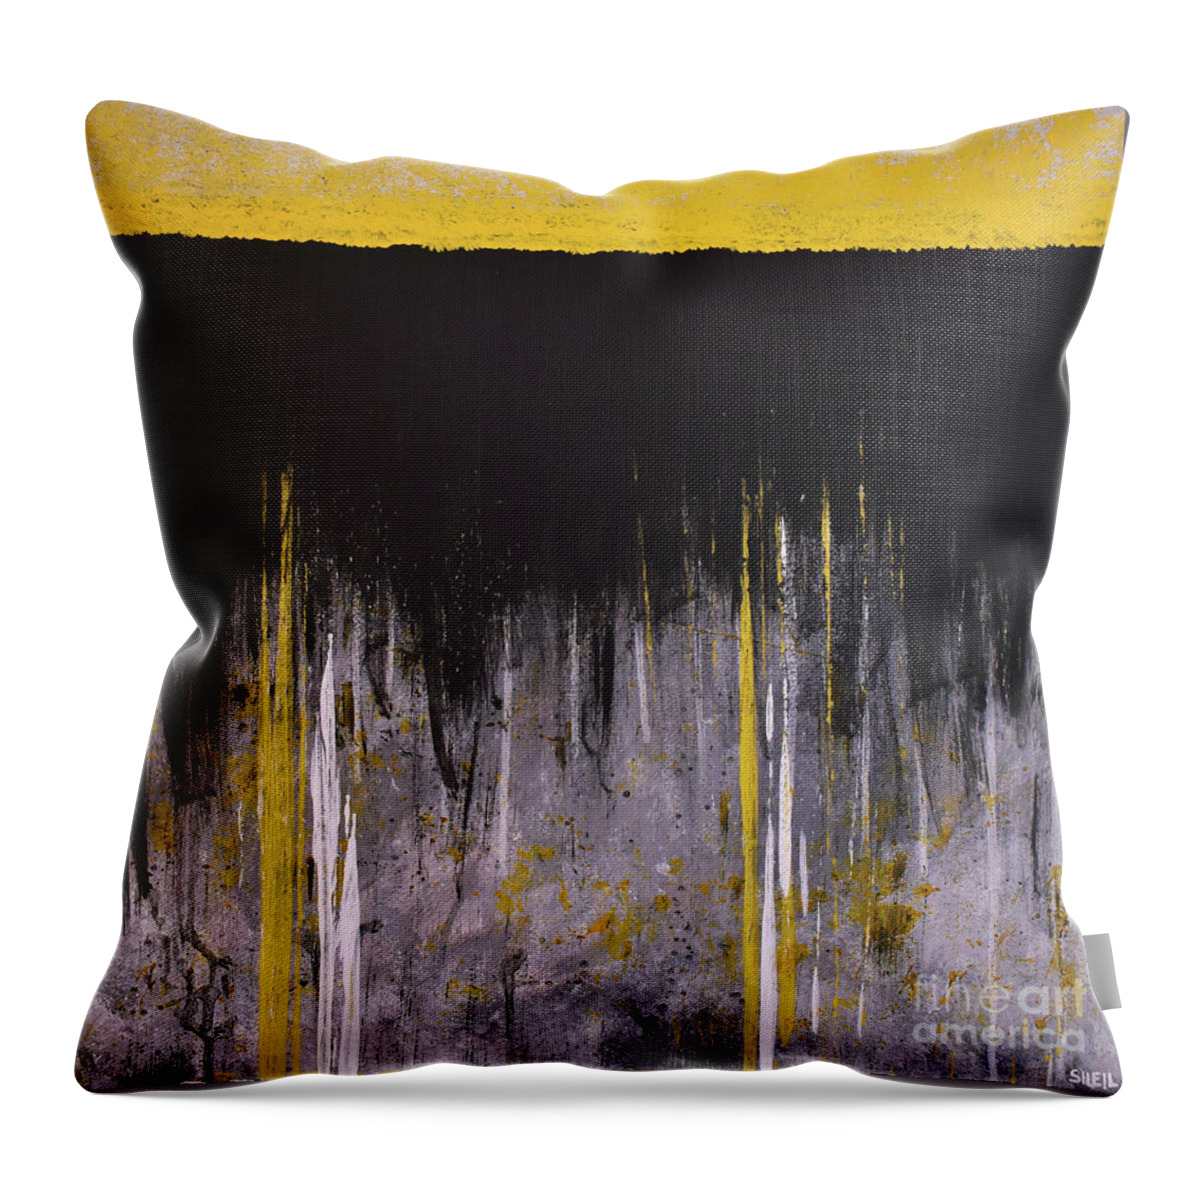 Yellow Throw Pillow featuring the painting Up Above by Amanda Sheil